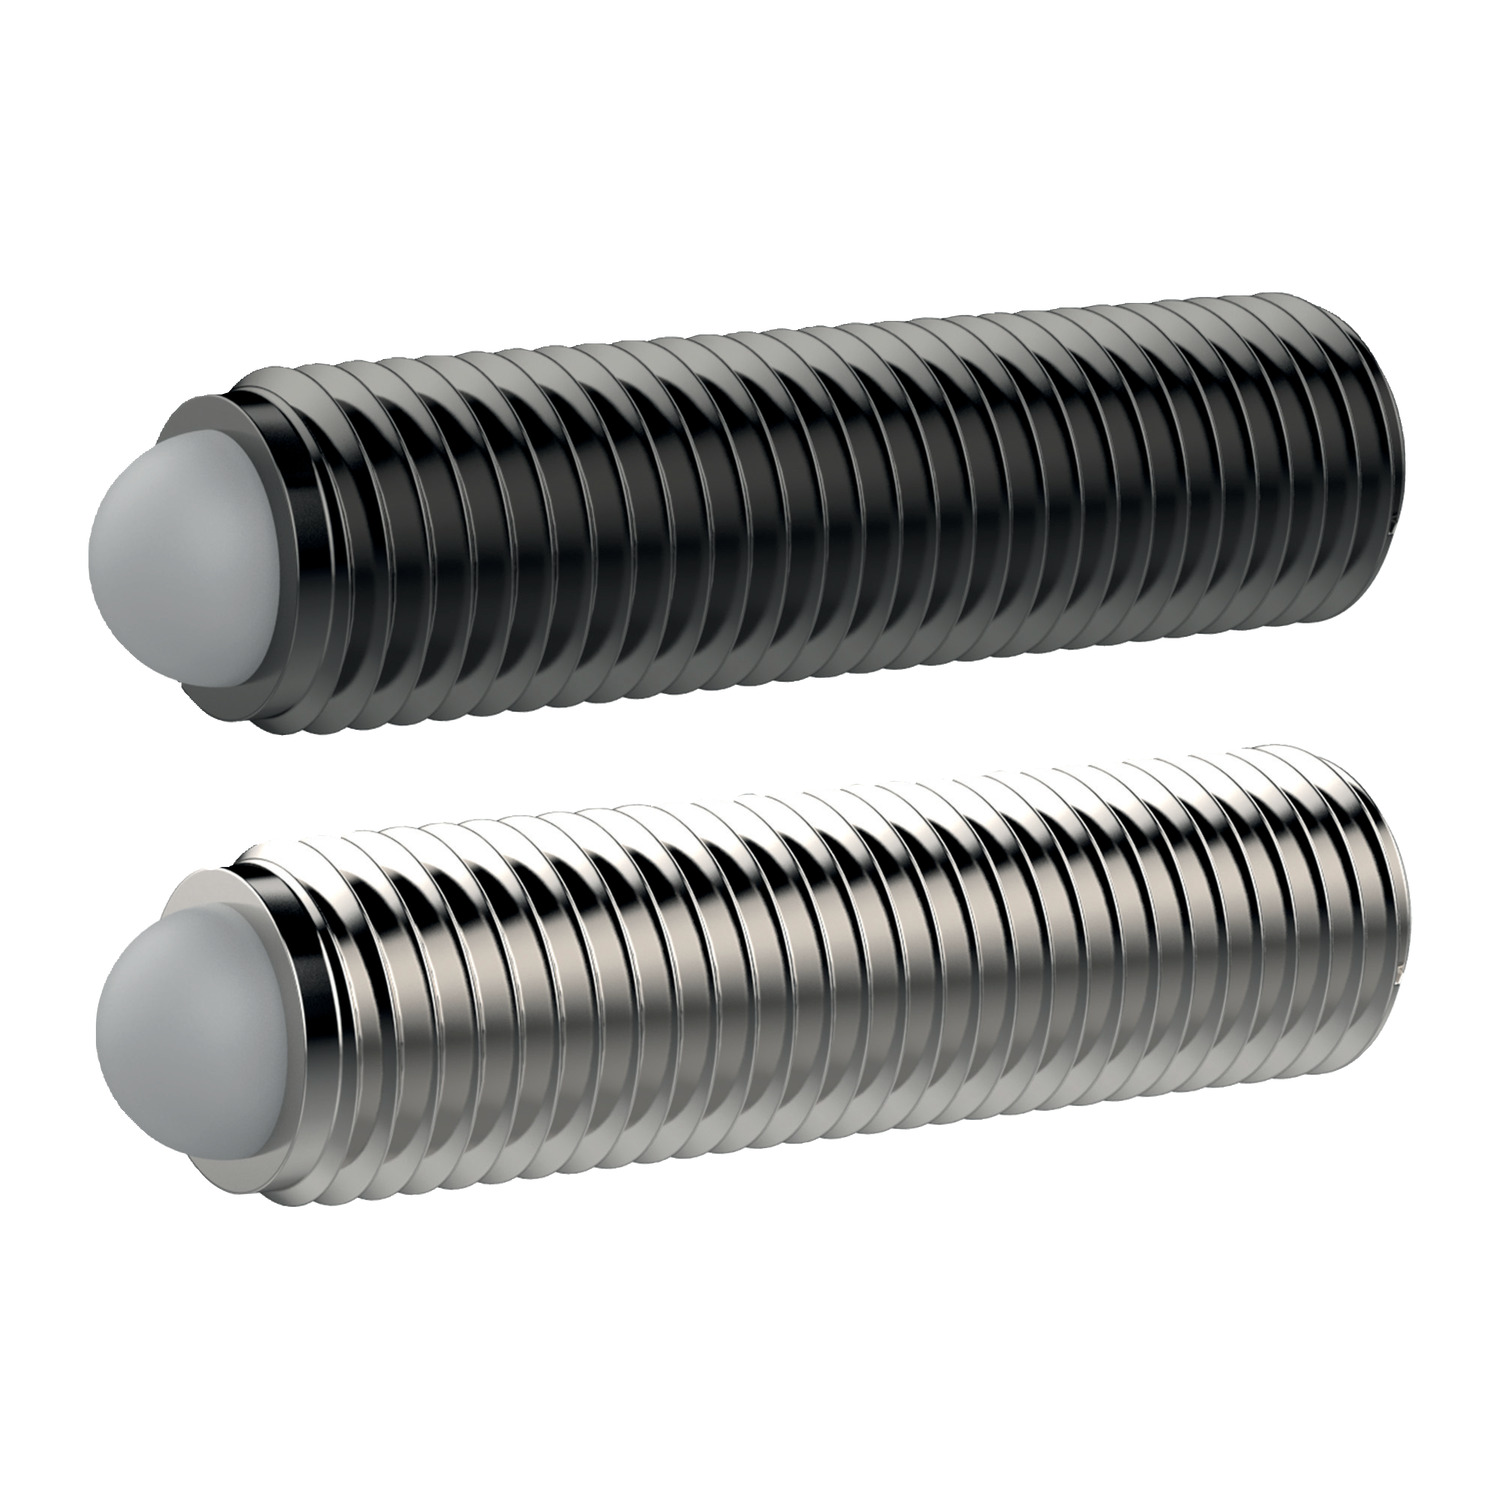 Thrust Screws - Ball Ended Headless thermoplastic ball ended thrust screw is suited to work with softer materials which can be marked whilst being held in position.